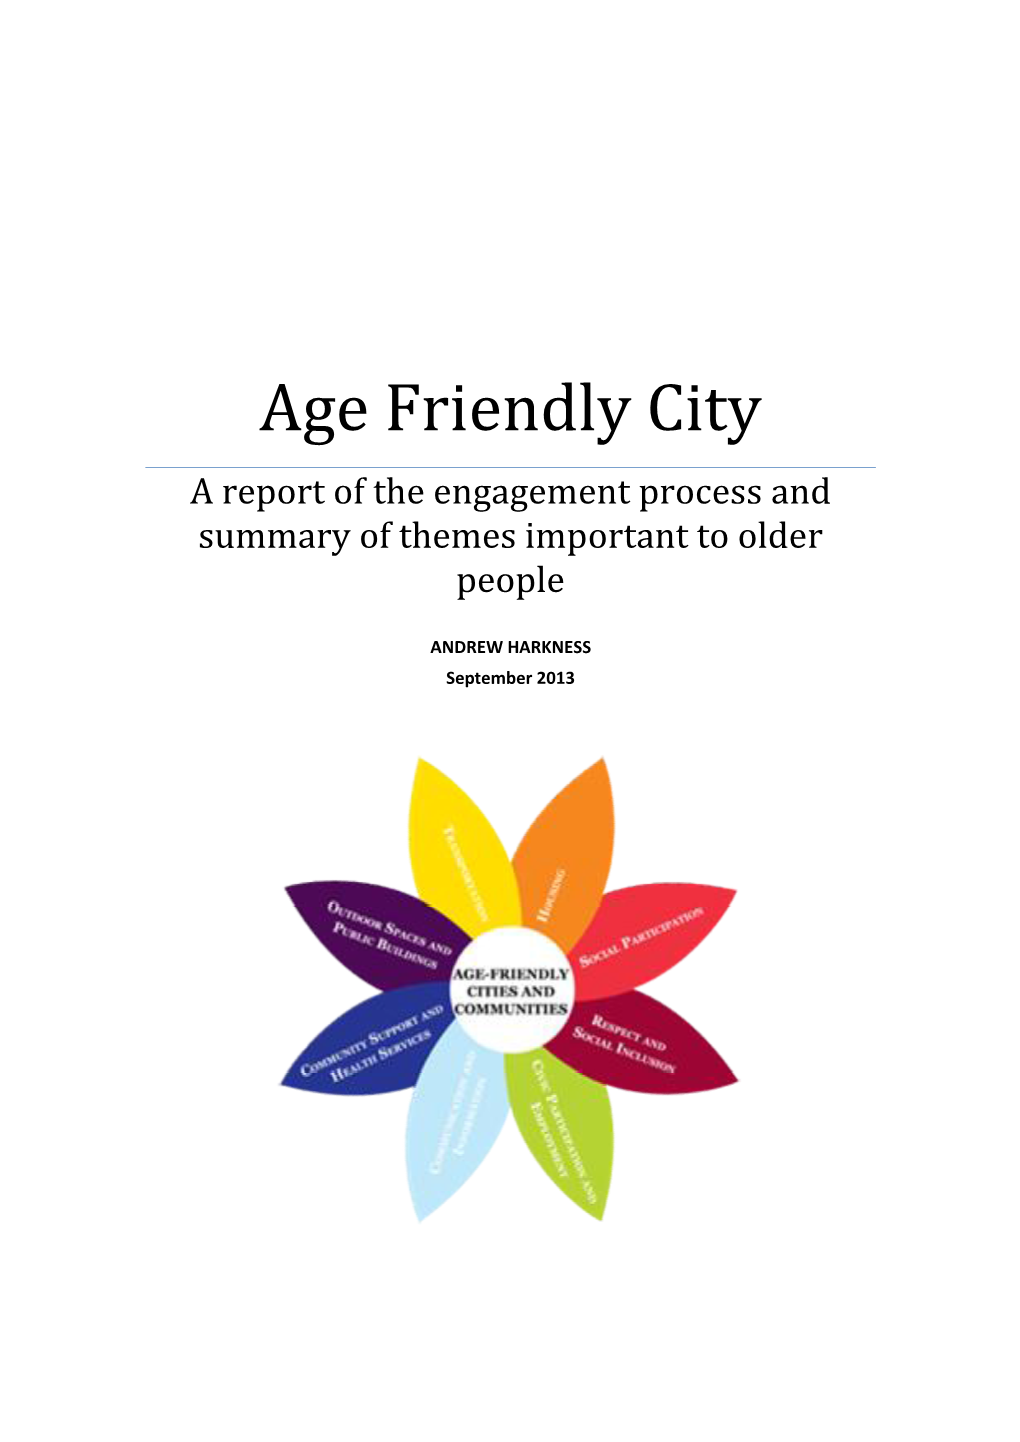 Stoke-On-Trent As an Age-Friendly City